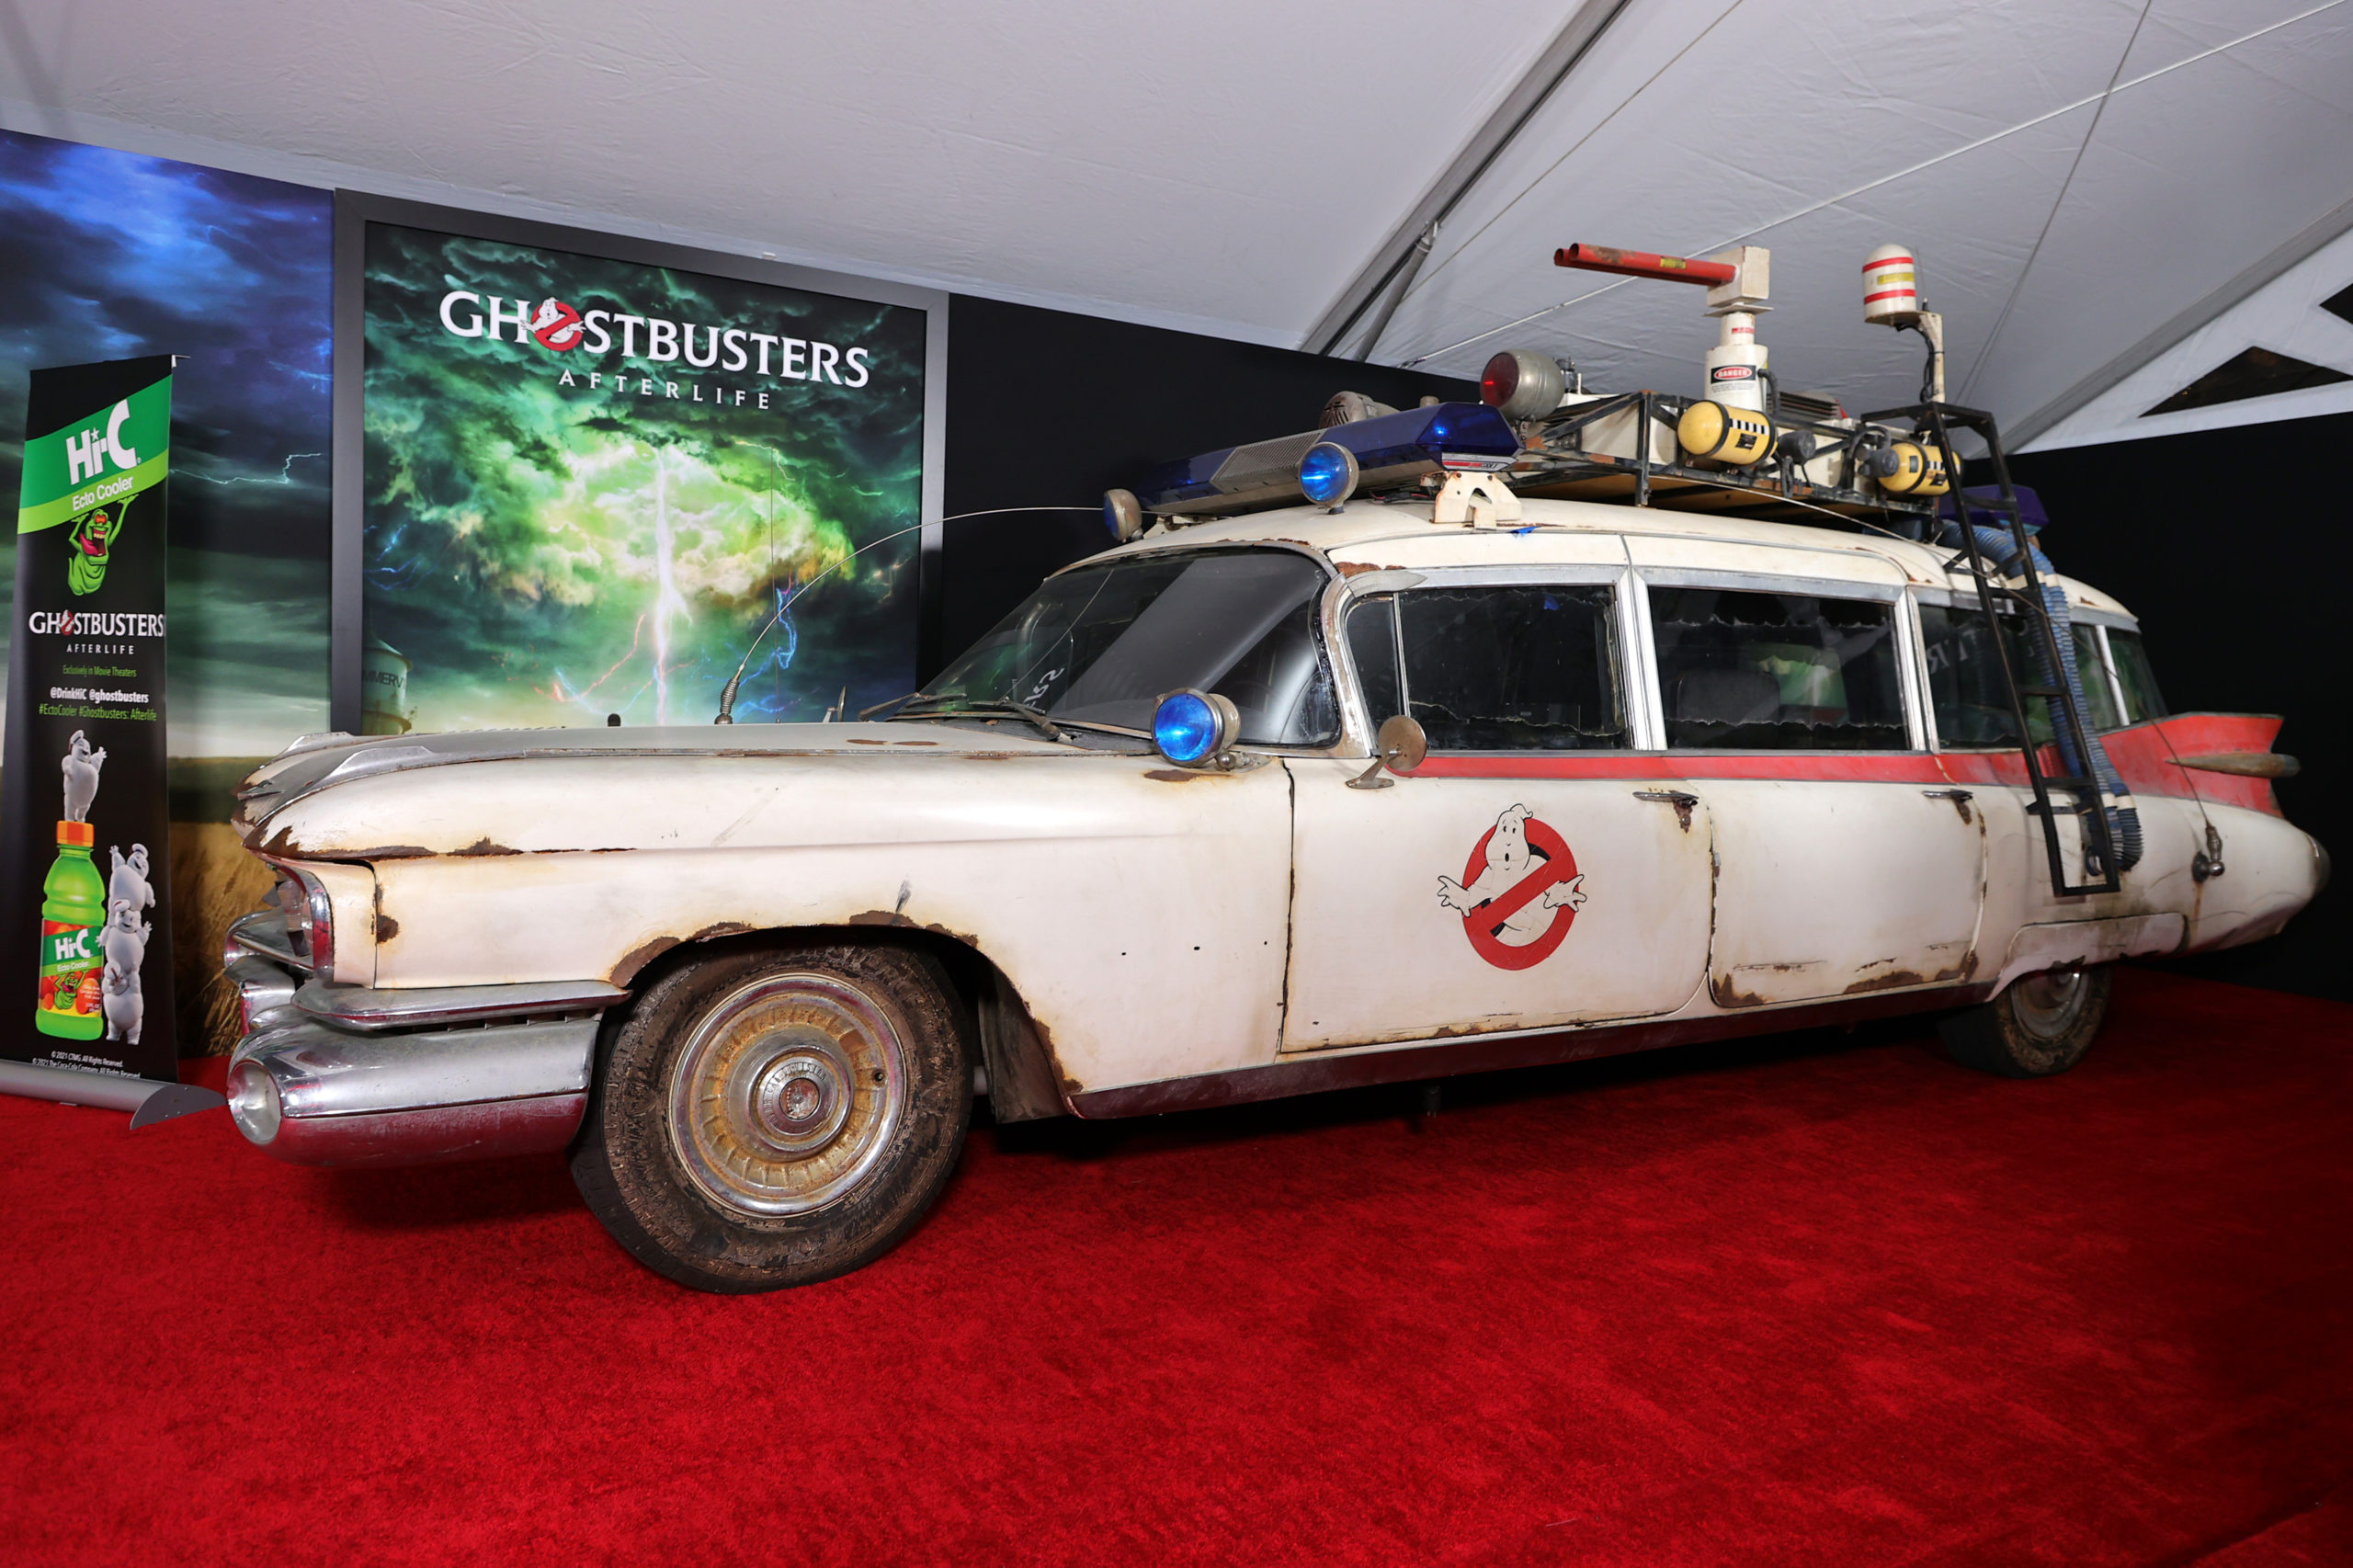 NEW YORK, NEW YORK - NOVEMBER 15: A view of the GhostBusters car at the GHOSTBUSTERS: AFTERLIFE World Premiere on November 15, 2021 in New York City. (Photo by Theo Wargo/Getty Images for Sony Pictures)